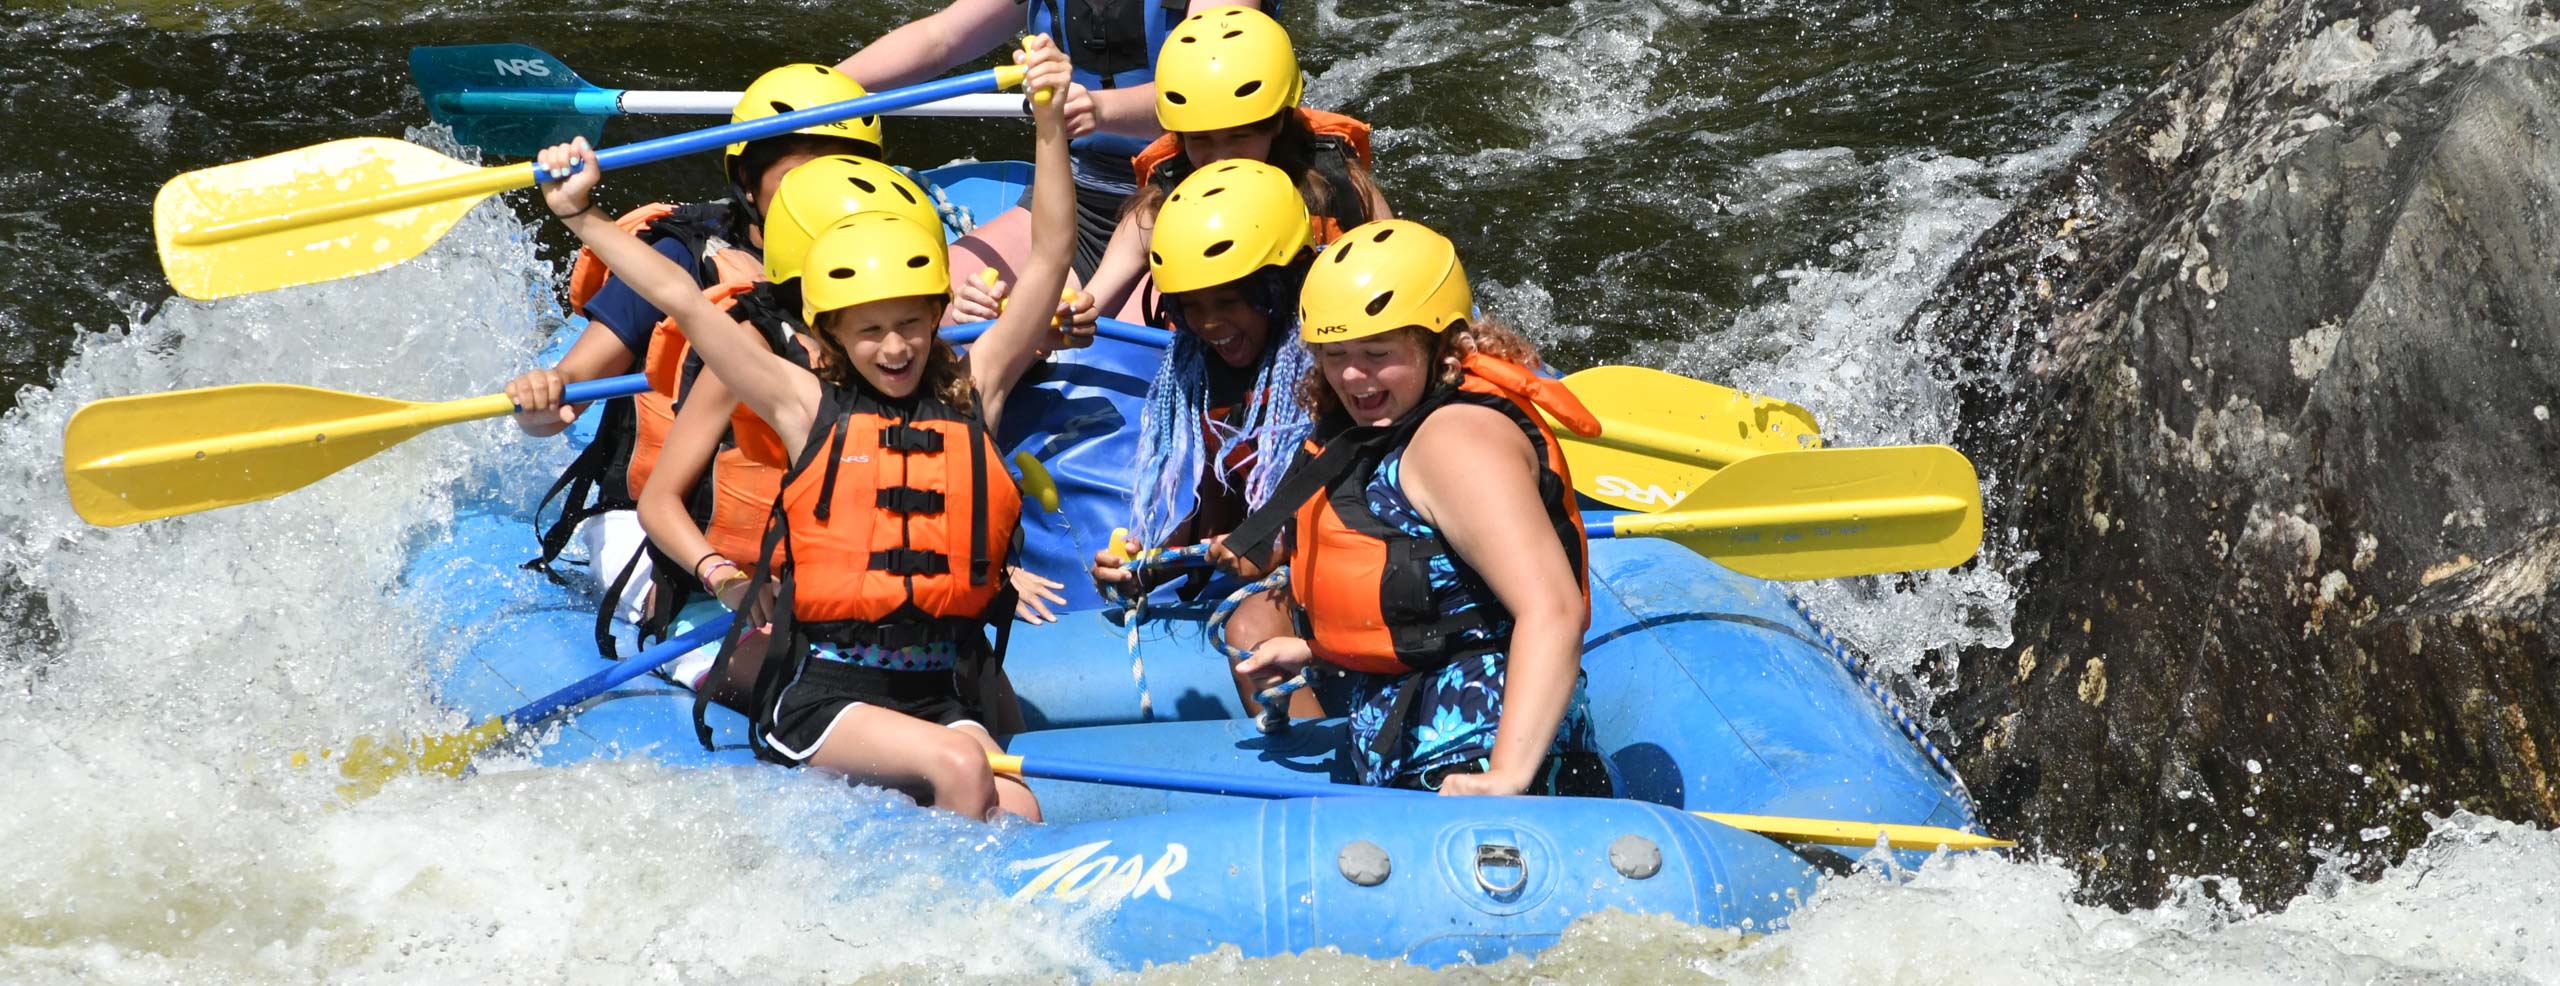 Group of girls excitedly rafting down the zoar gap